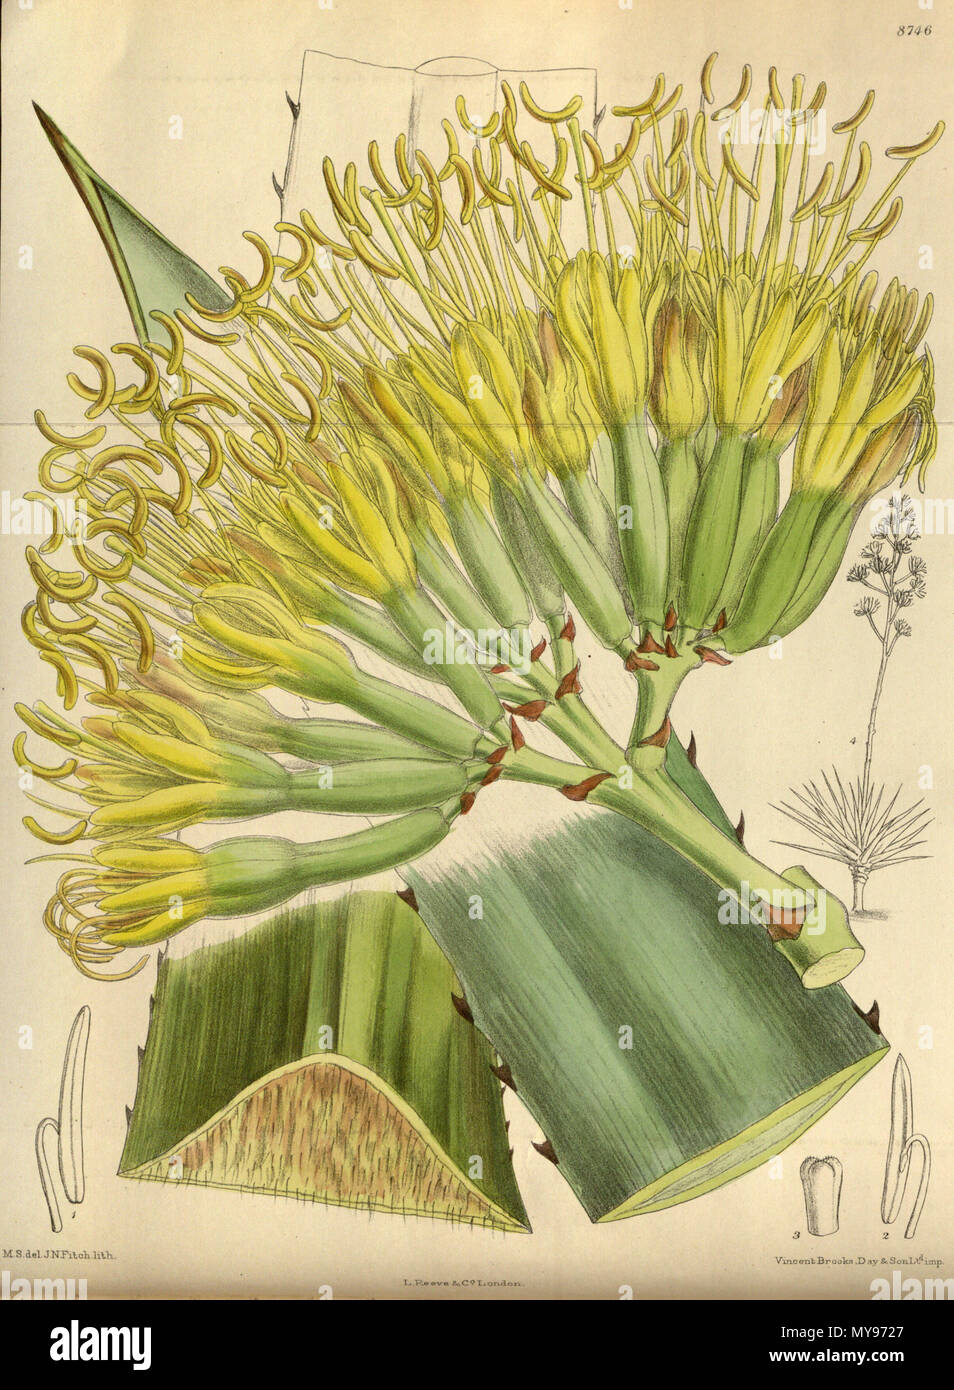 . Agave fourcroydes, Asparagaceae, Agavoideae . 1918. M.S. del., J.N.Fitch lith. 25 Agave fourcroydes 144-8746 Stock Photo